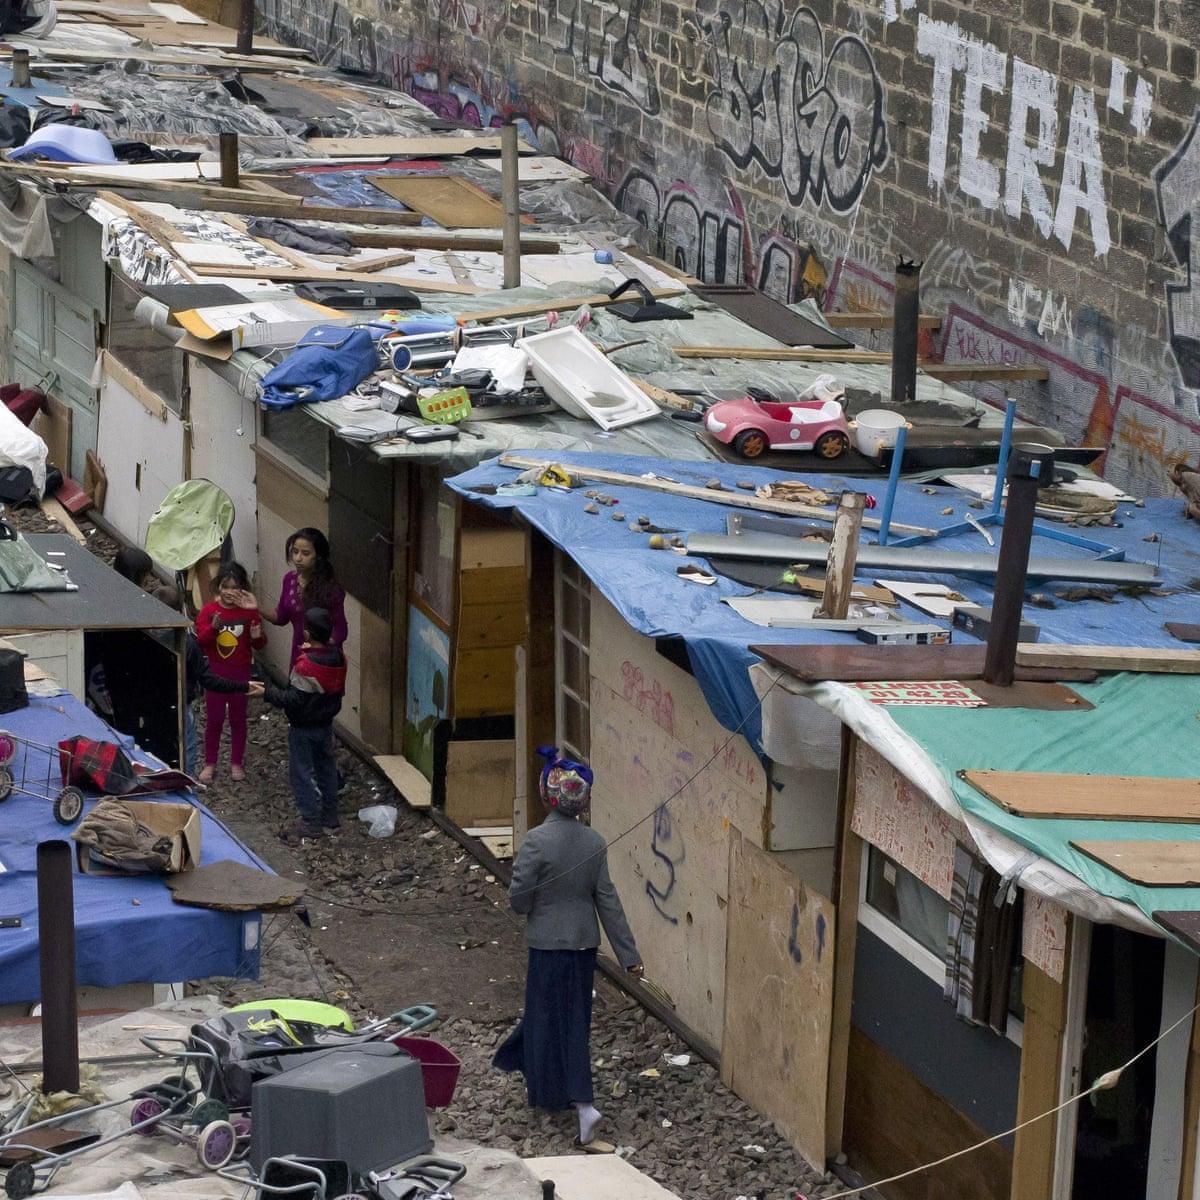 Life in the new shanty town taking root on Paris's abandoned railway |  Cities | The Guardian